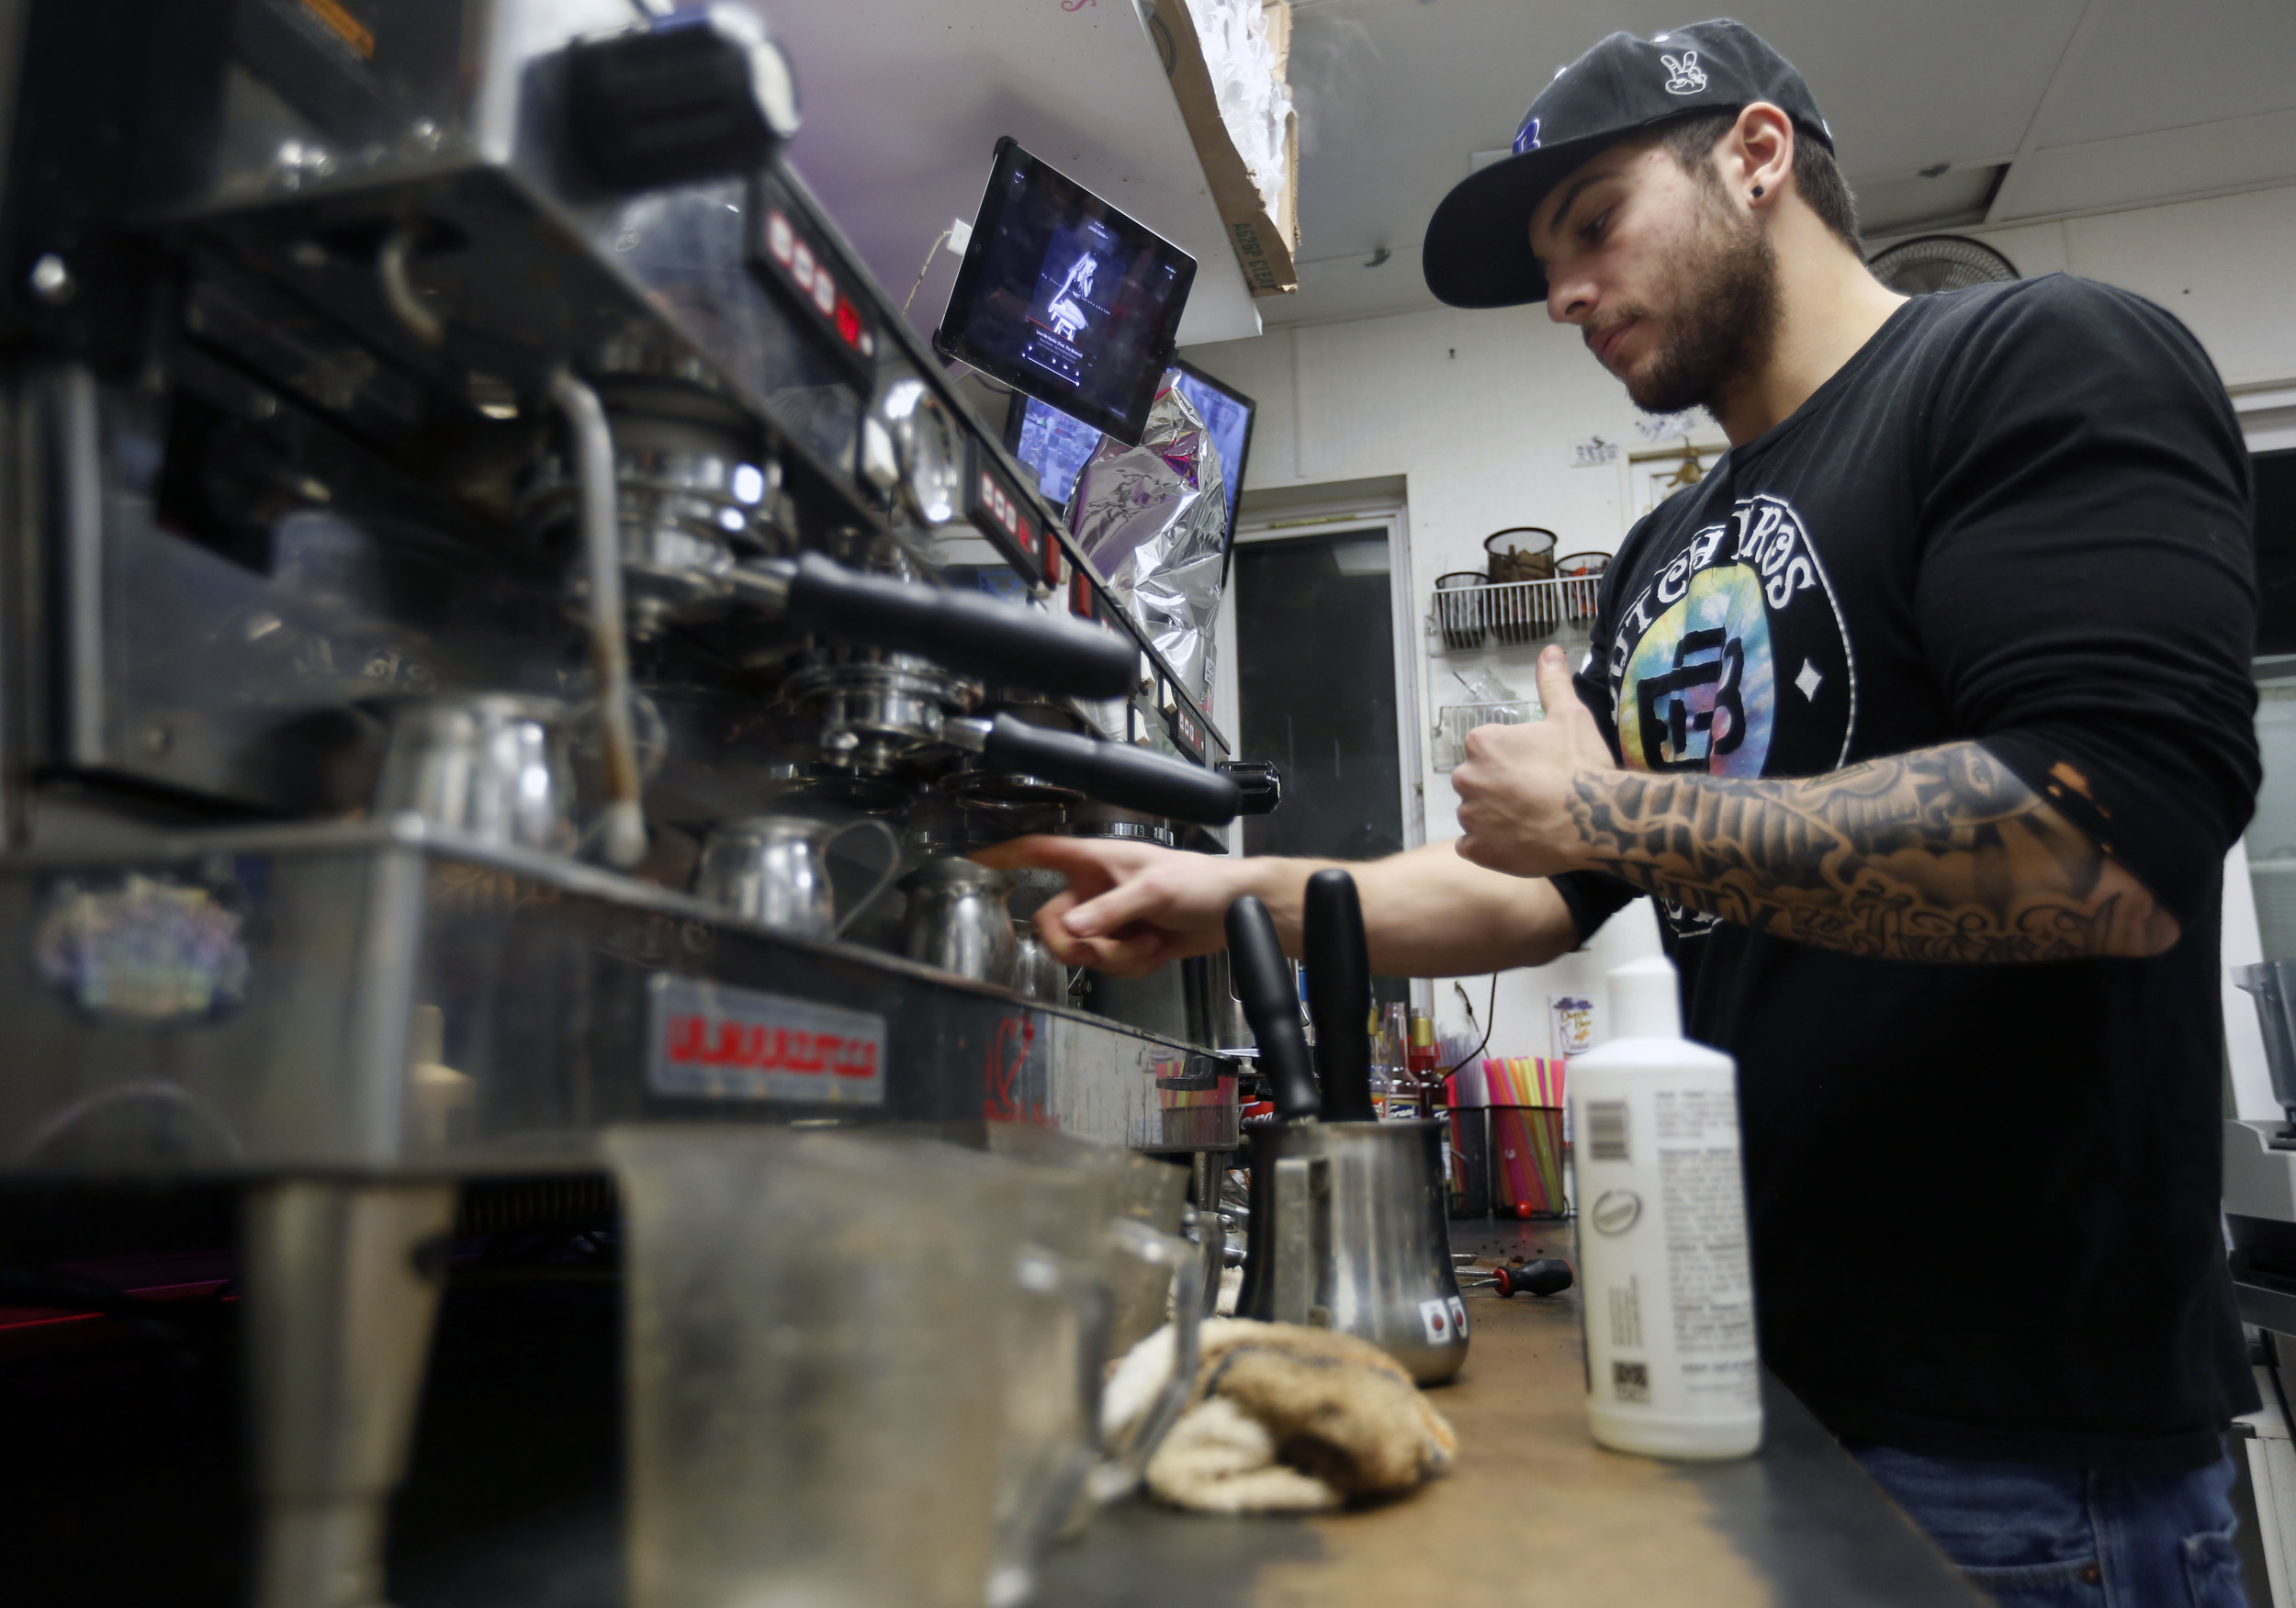   Zade Hakki cleans the espresso machine while working at 12 a.m. on the graveyard shift at Dutch Bros. Coffee on Clearwater Avenue in Kennewick. For Hakki the job isn’t about making coffee but the conversations with customers.     